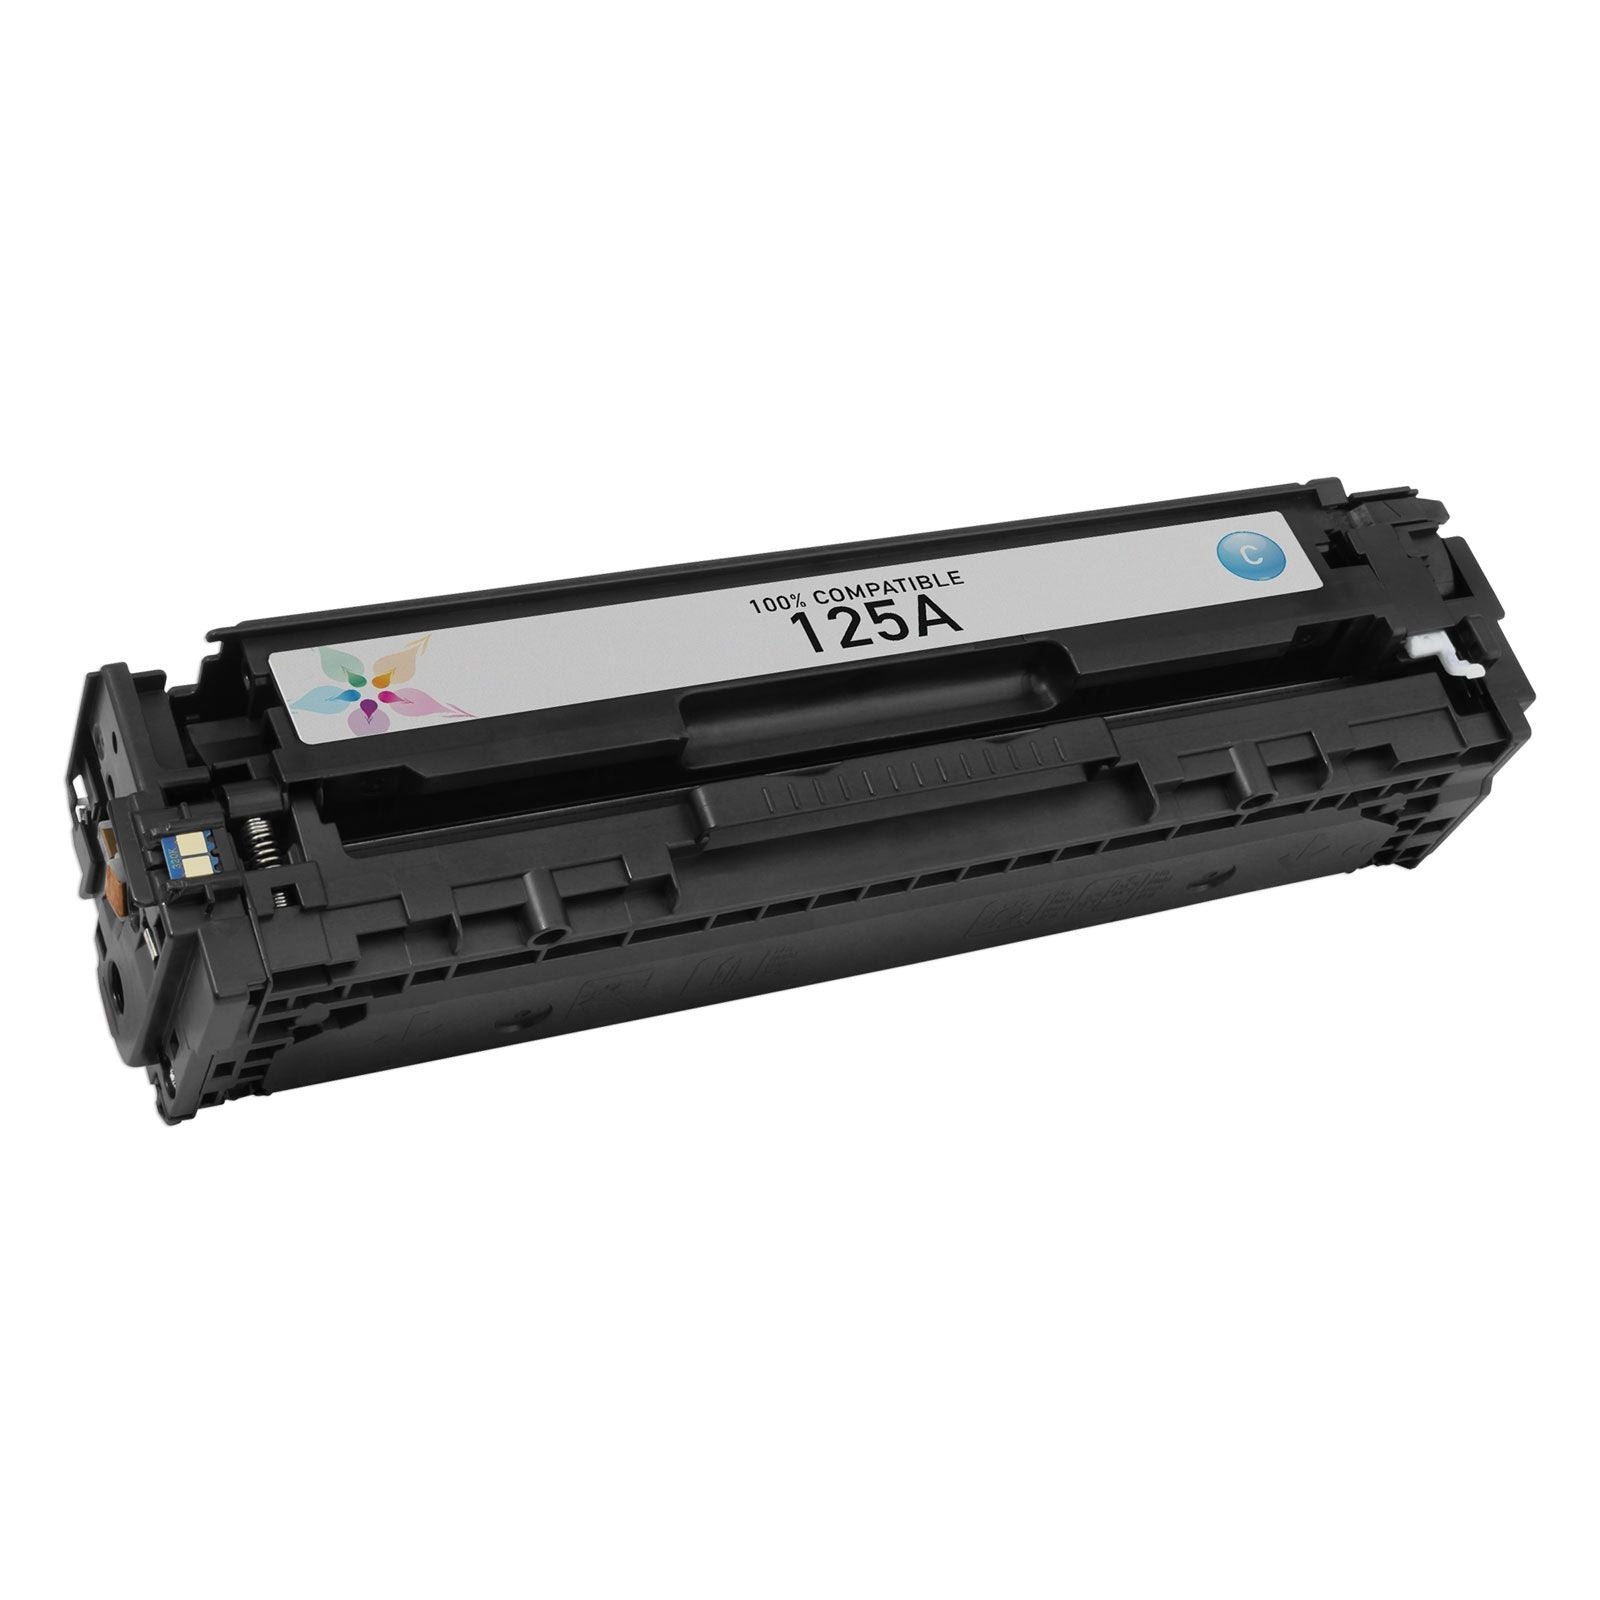 IMPERIAL BRAND Compatible toner cartridge for HP 125A CYAN LASER TONER 1400 PAGES